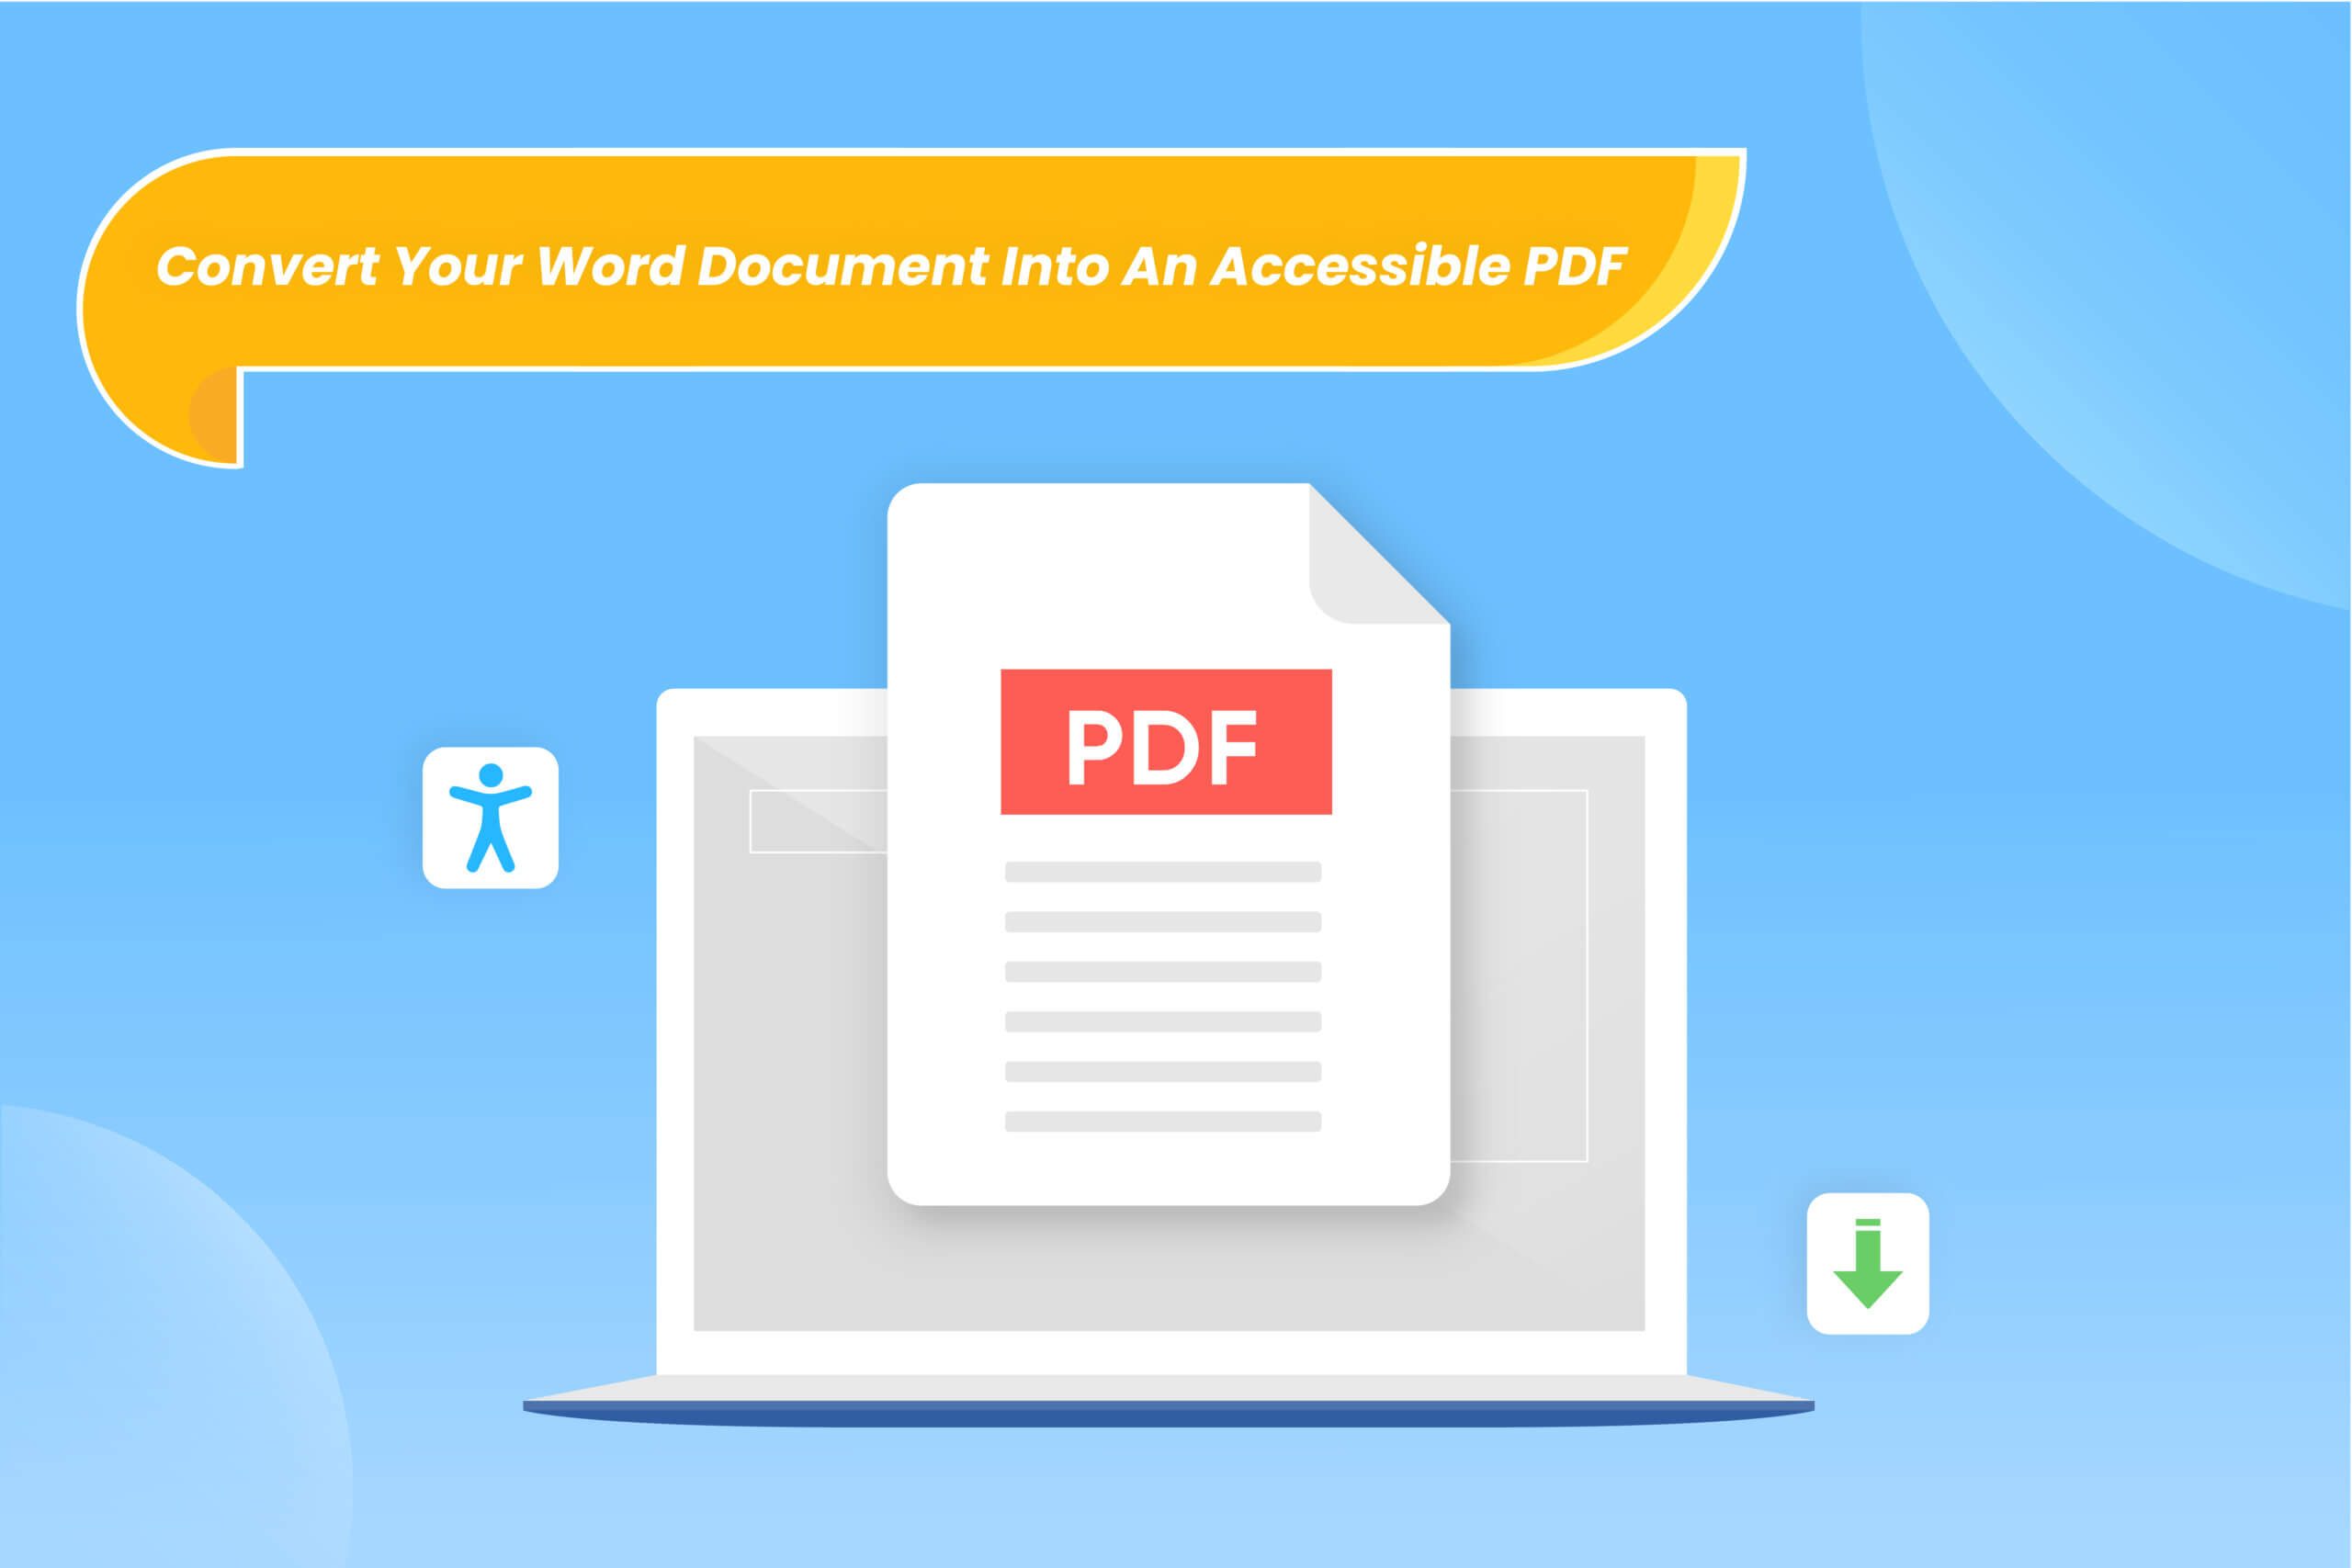 Convert-Your-Word-Document-Into-An-Accessible-PDF-scaled